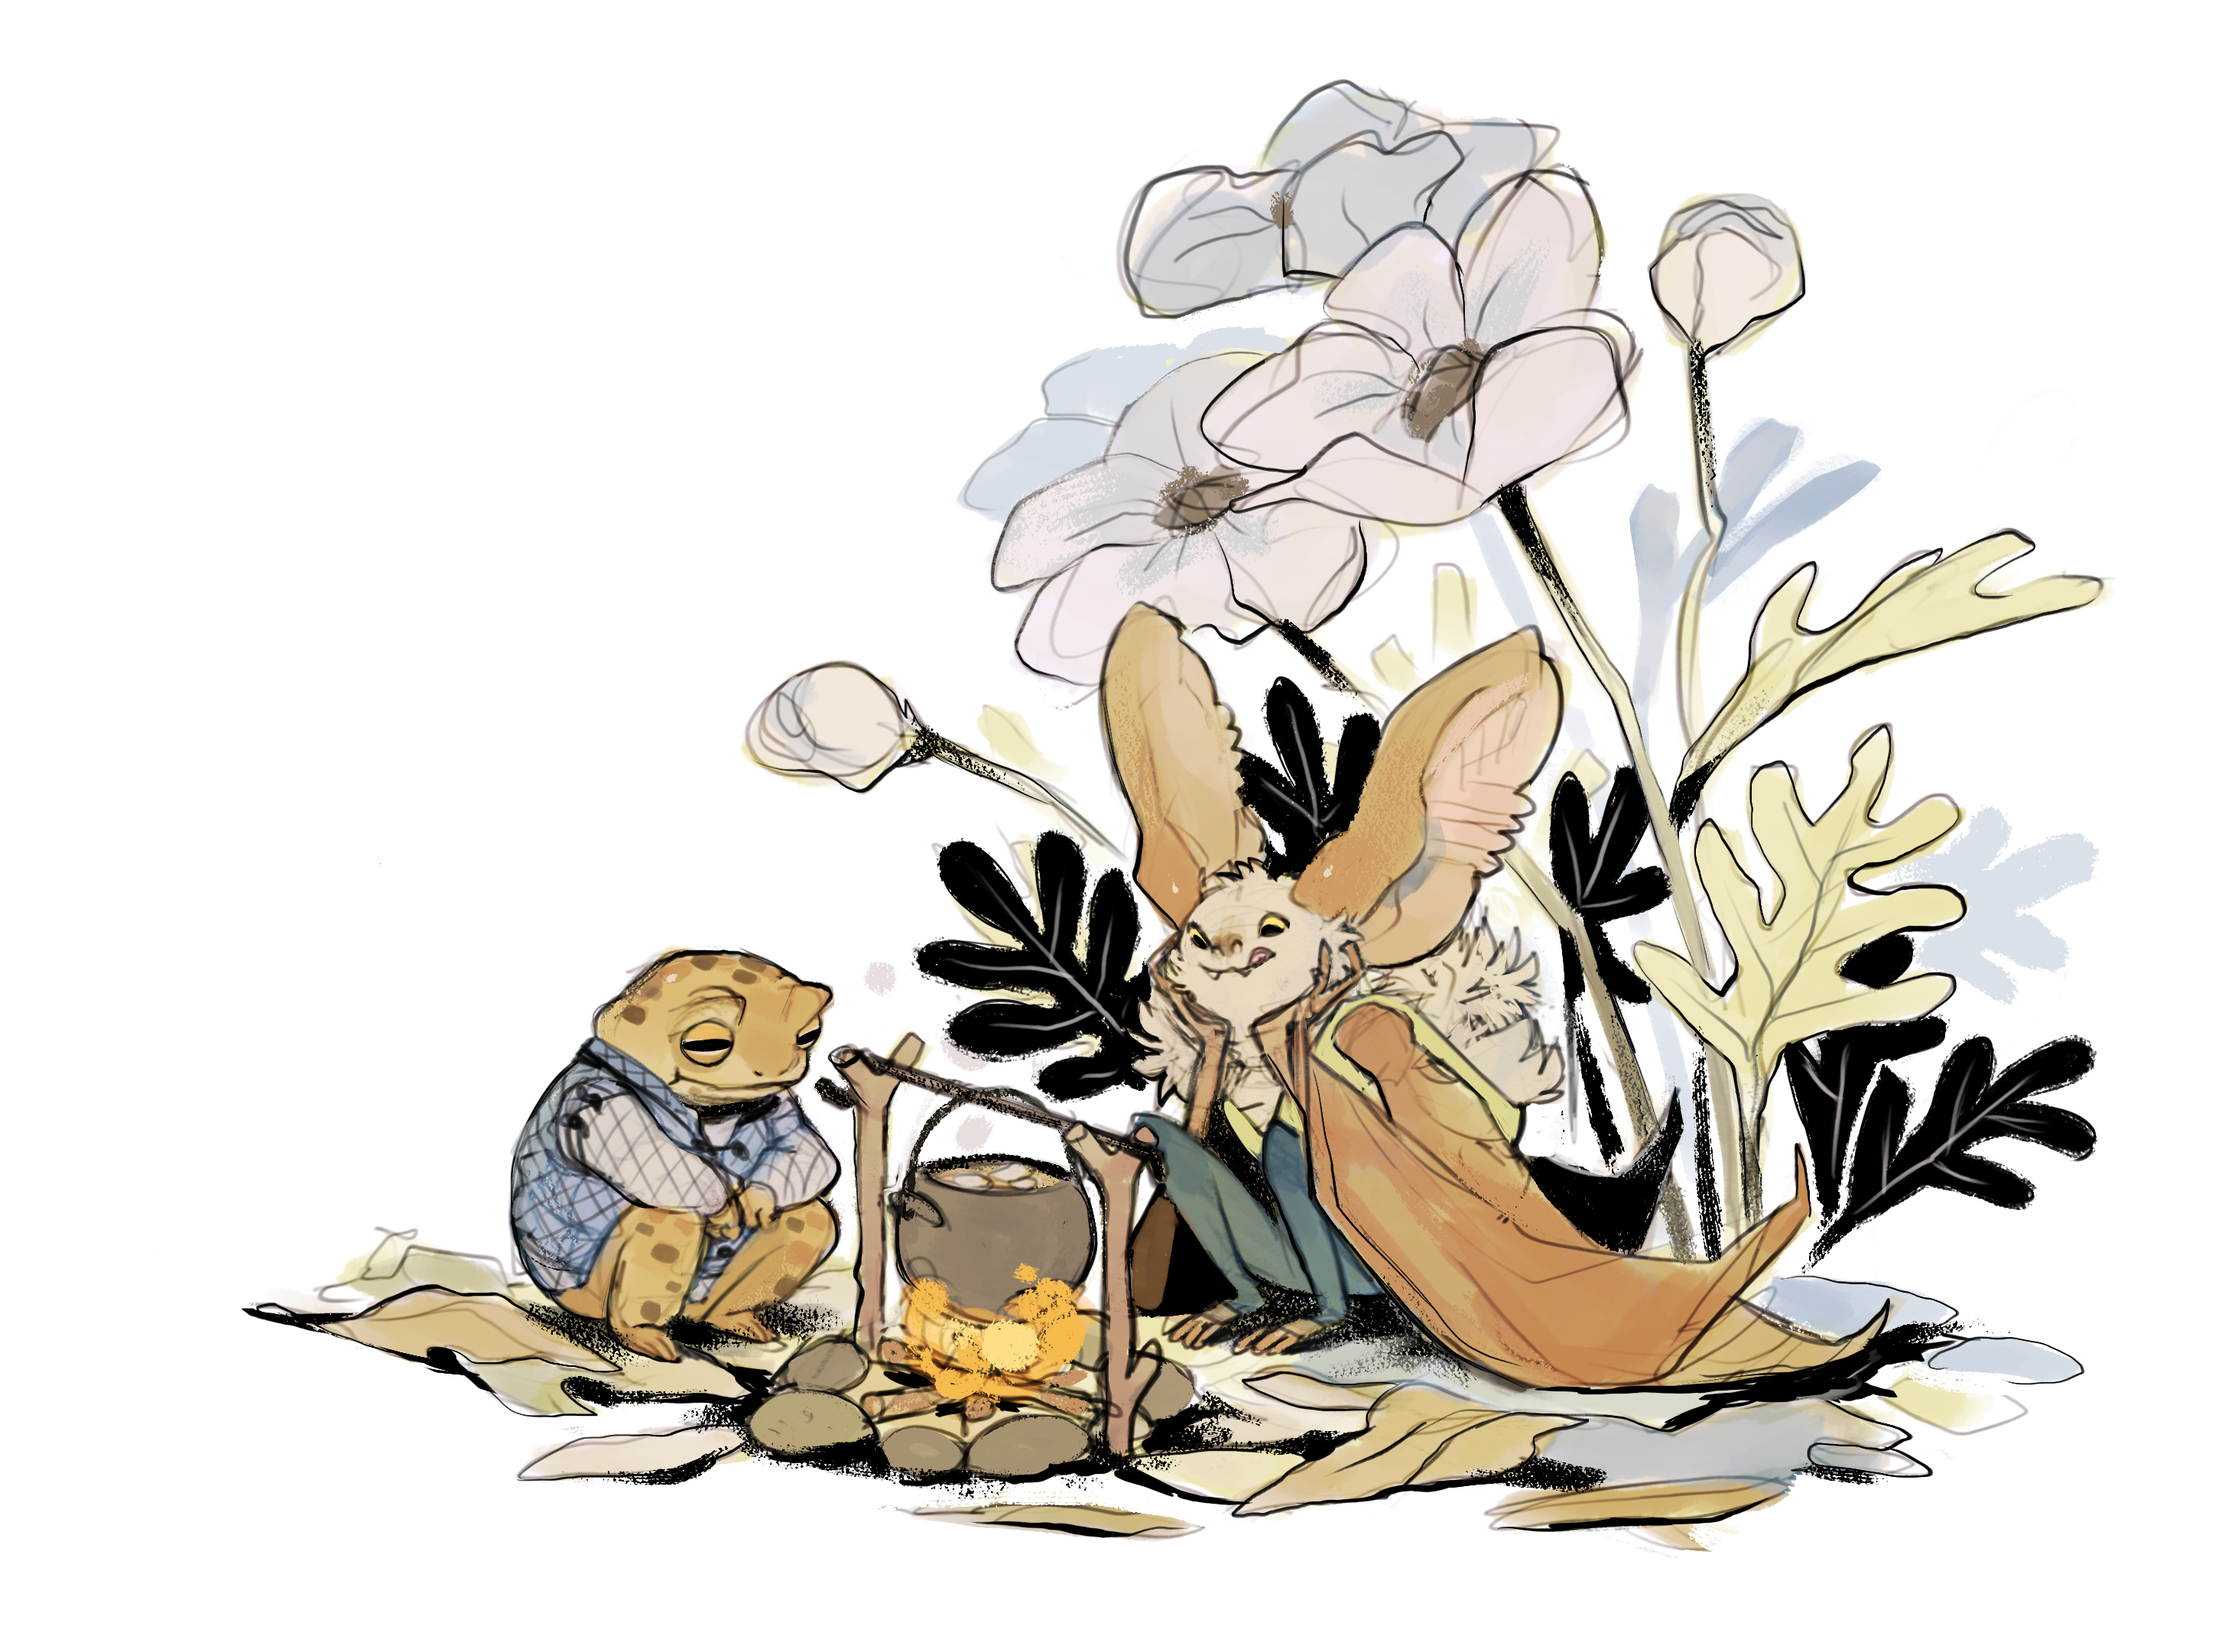 Children's book illustration of a toad and a bat sitting next to a patch of massive flowers, while starring at a small cauldron over a tiny fire.